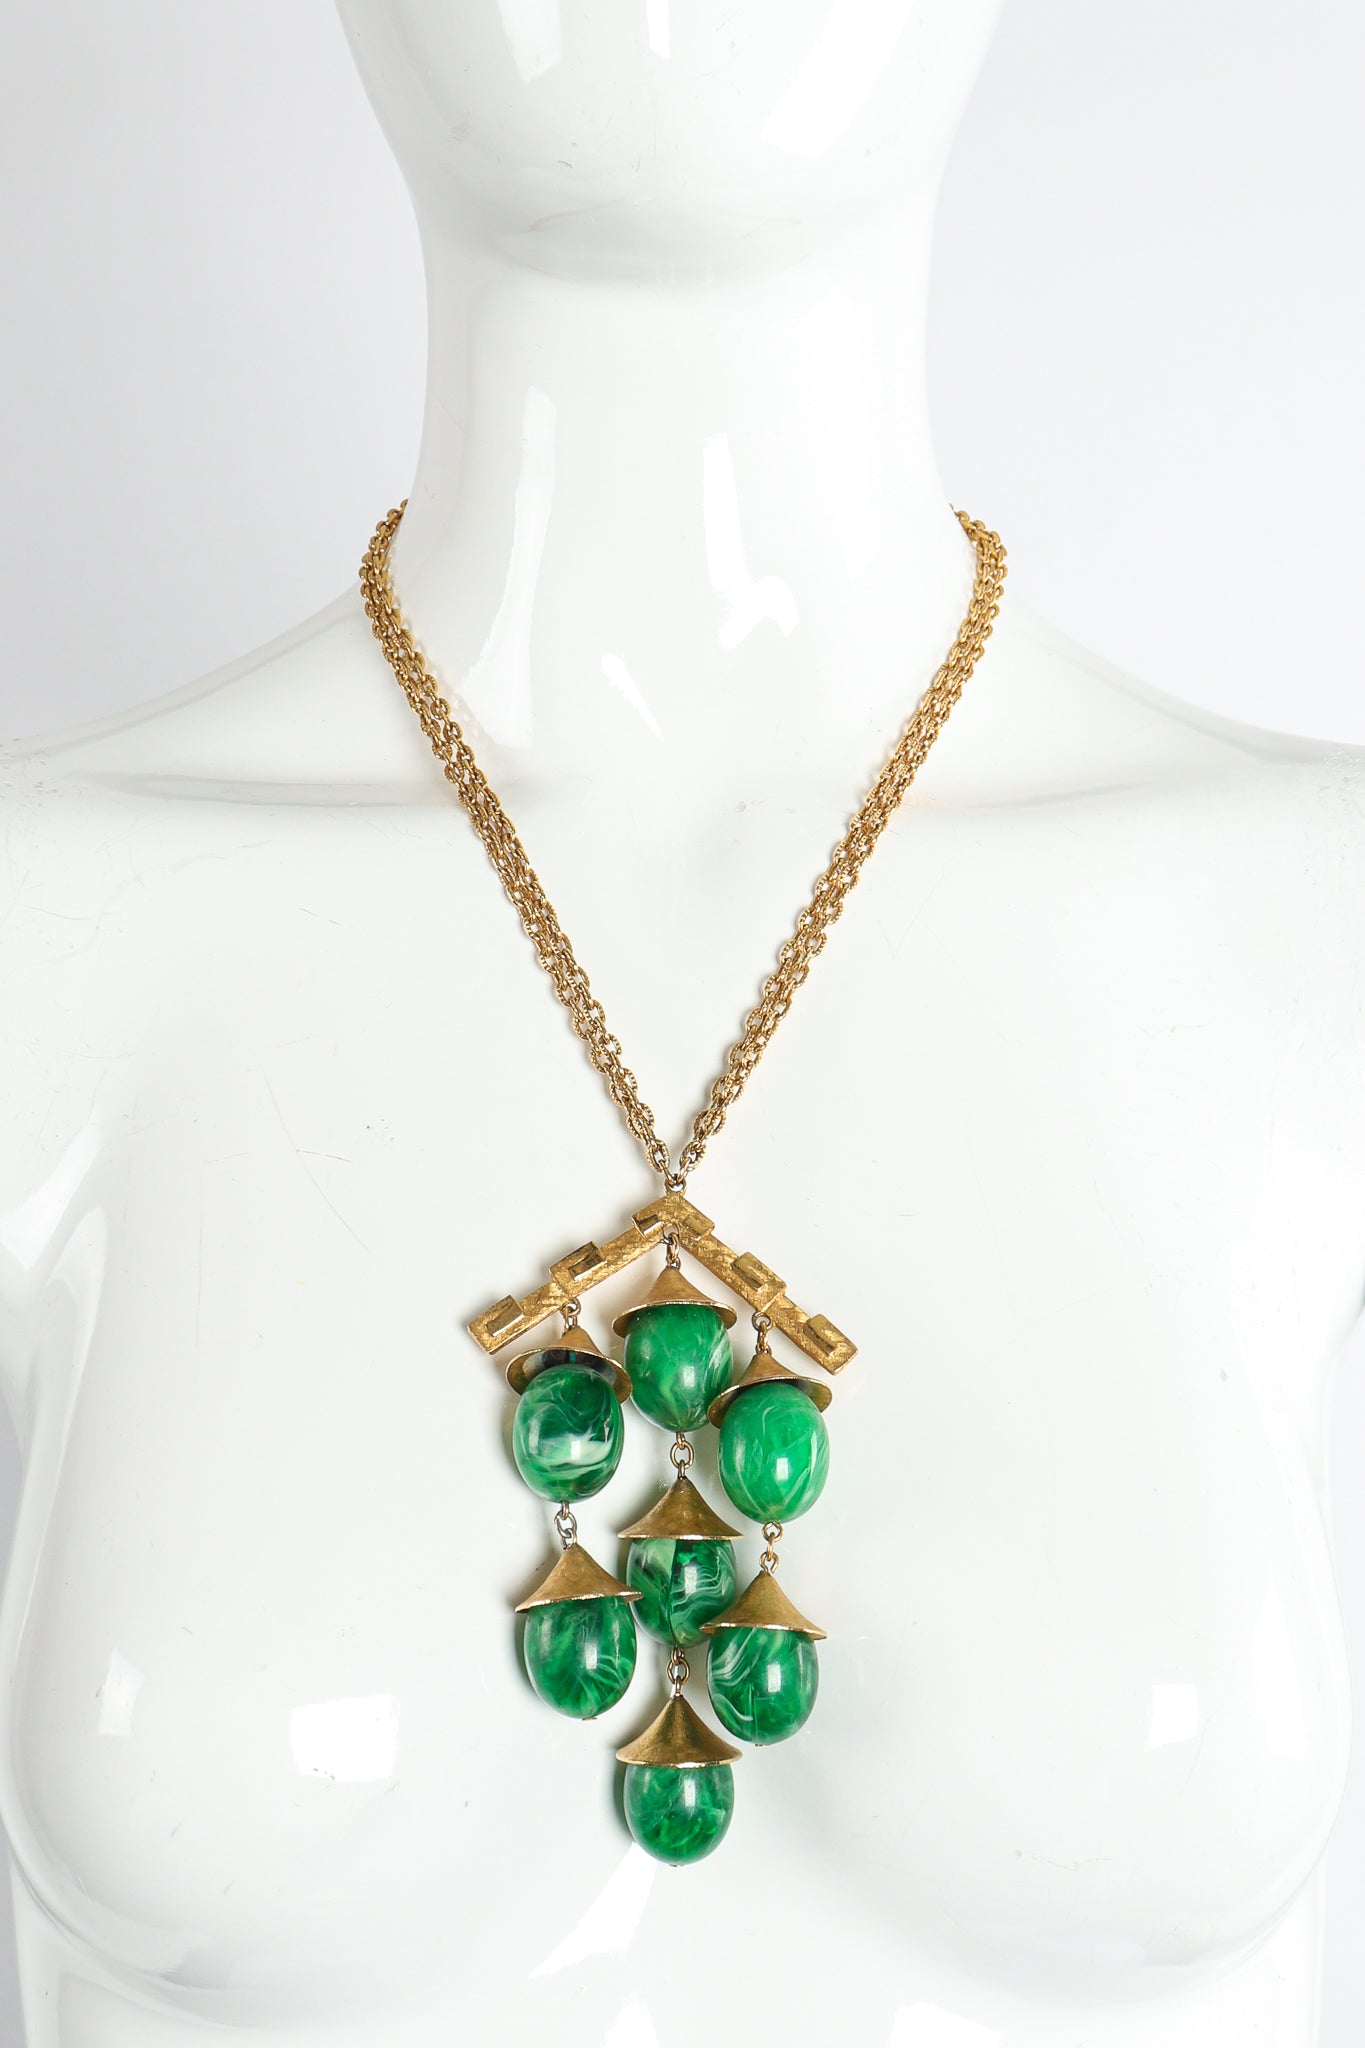 Vintage Trifari Faux Malachite Pagoda Bell Pendant Necklace on Mannequin at Recess Los Angeles